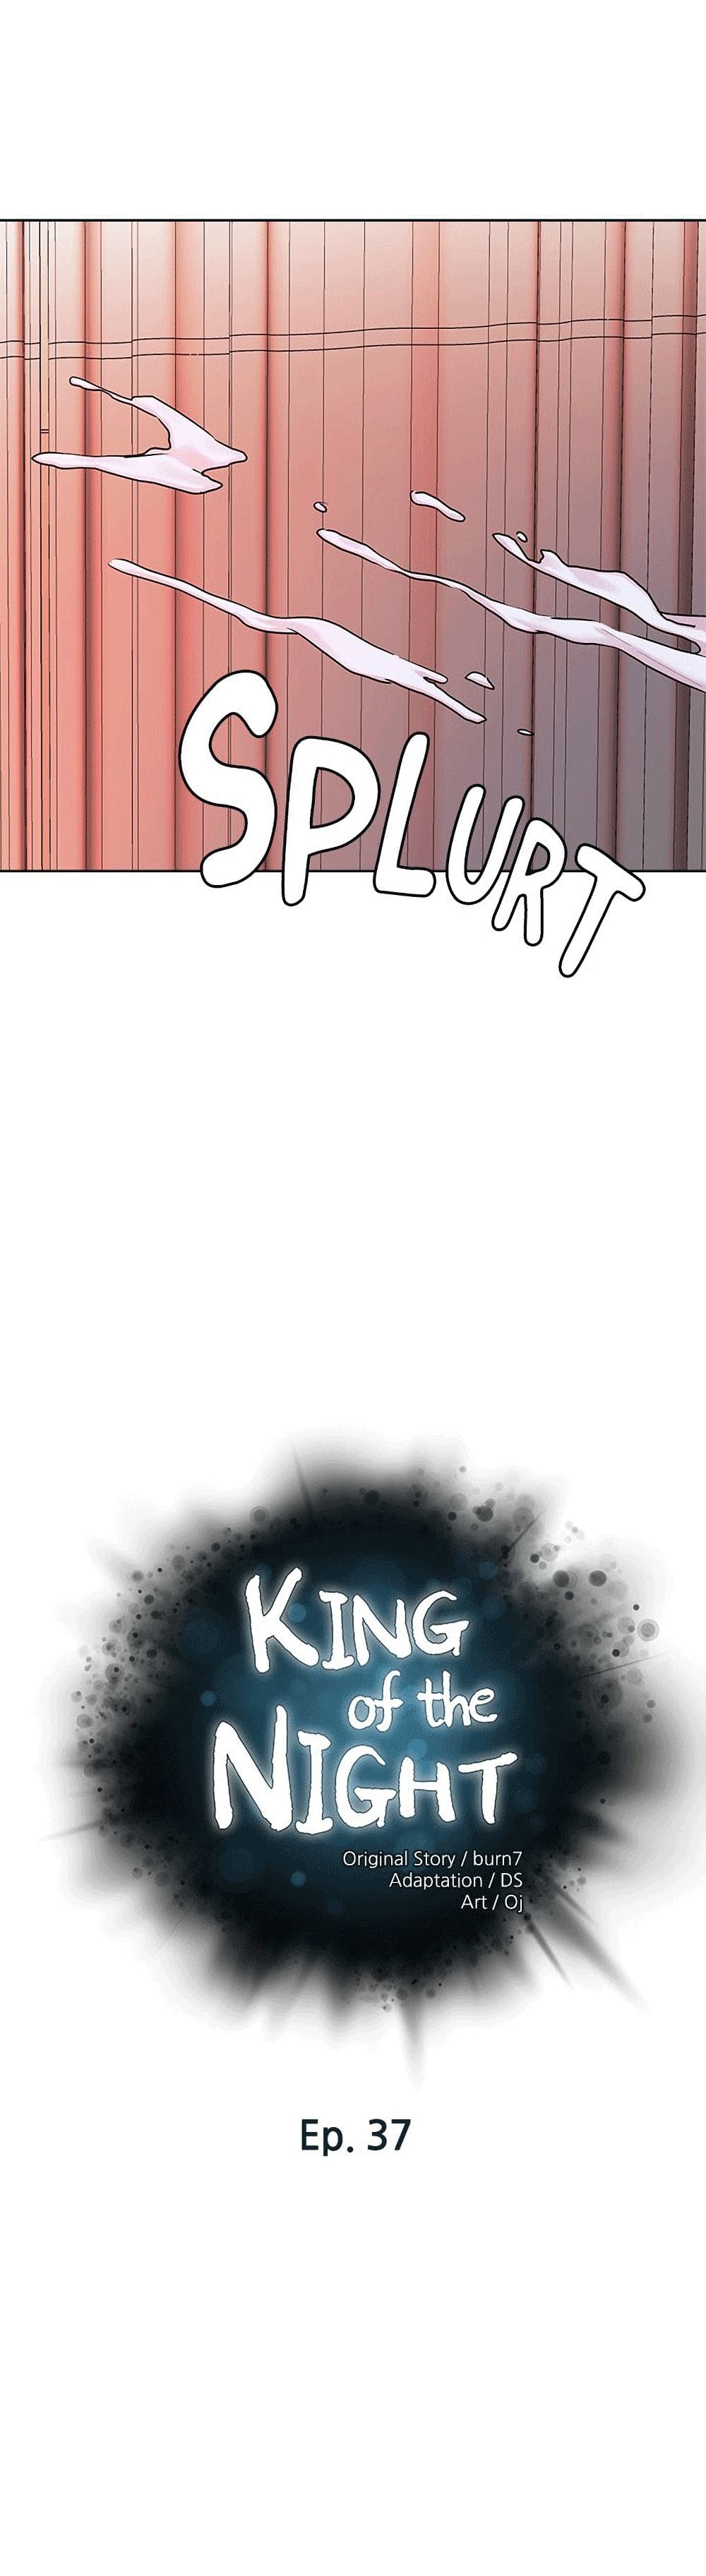 King of the Night 37 (1)